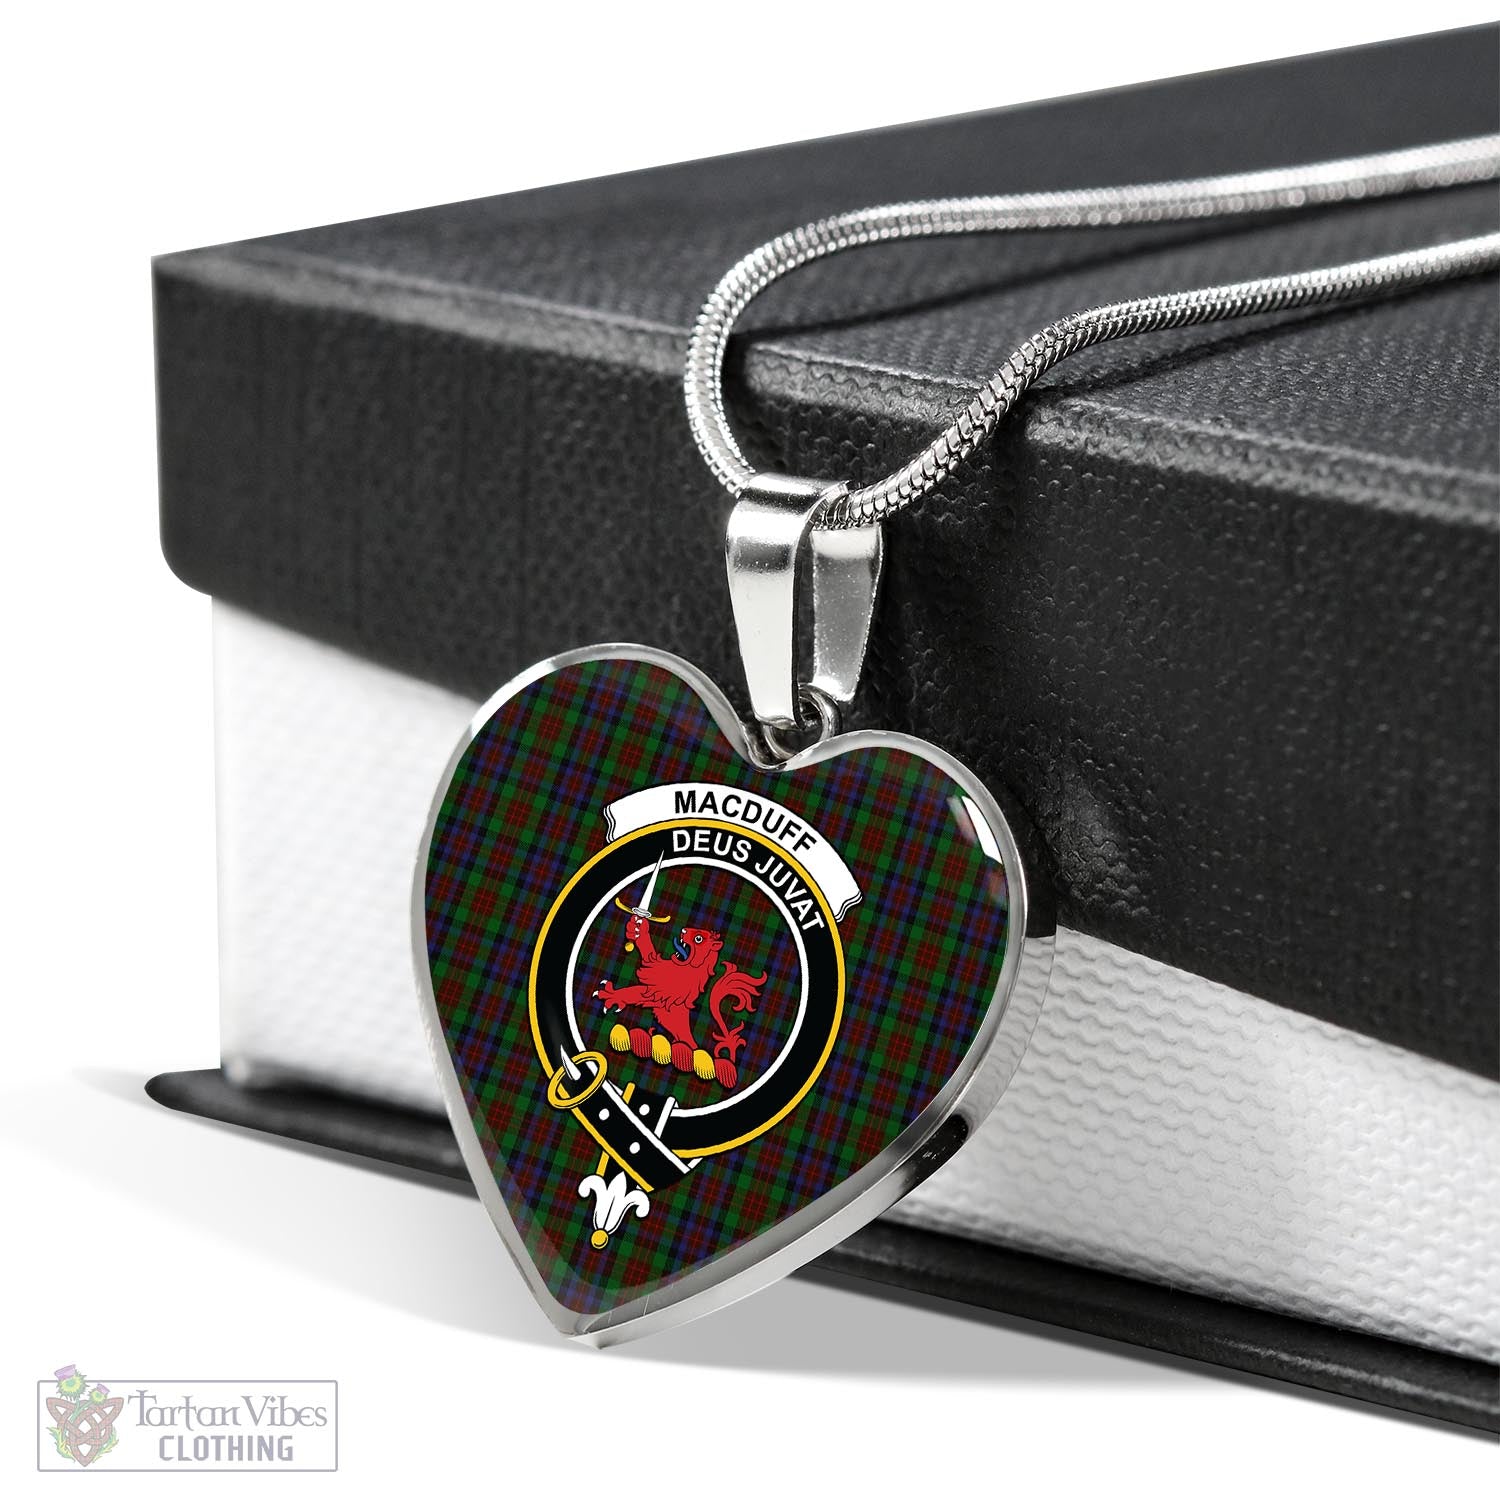 Tartan Vibes Clothing MacDuff Hunting Tartan Heart Necklace with Family Crest